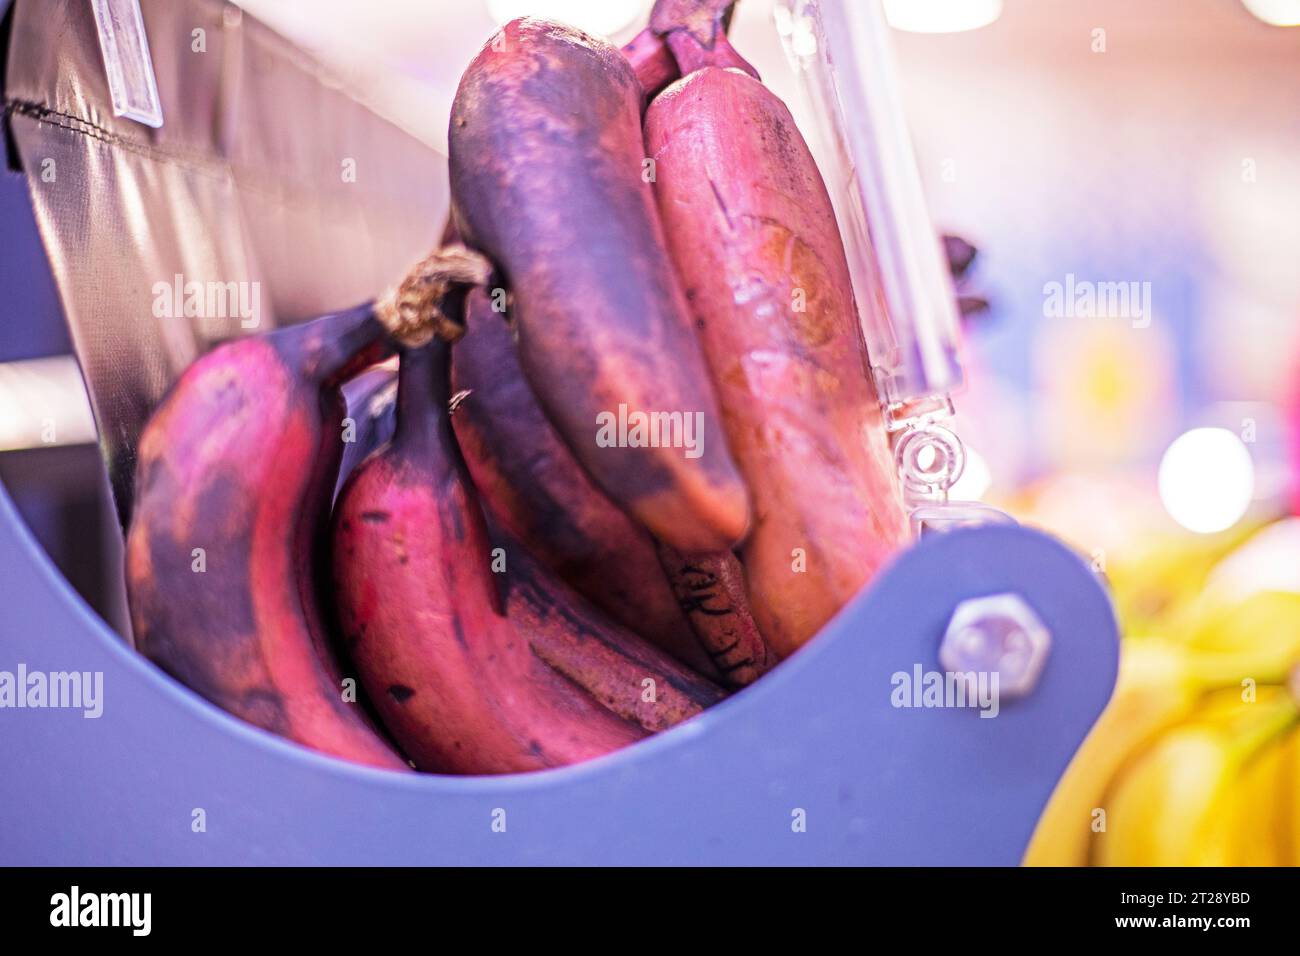 bunches of brown bananas on the counter in a supermarket Stock Photo